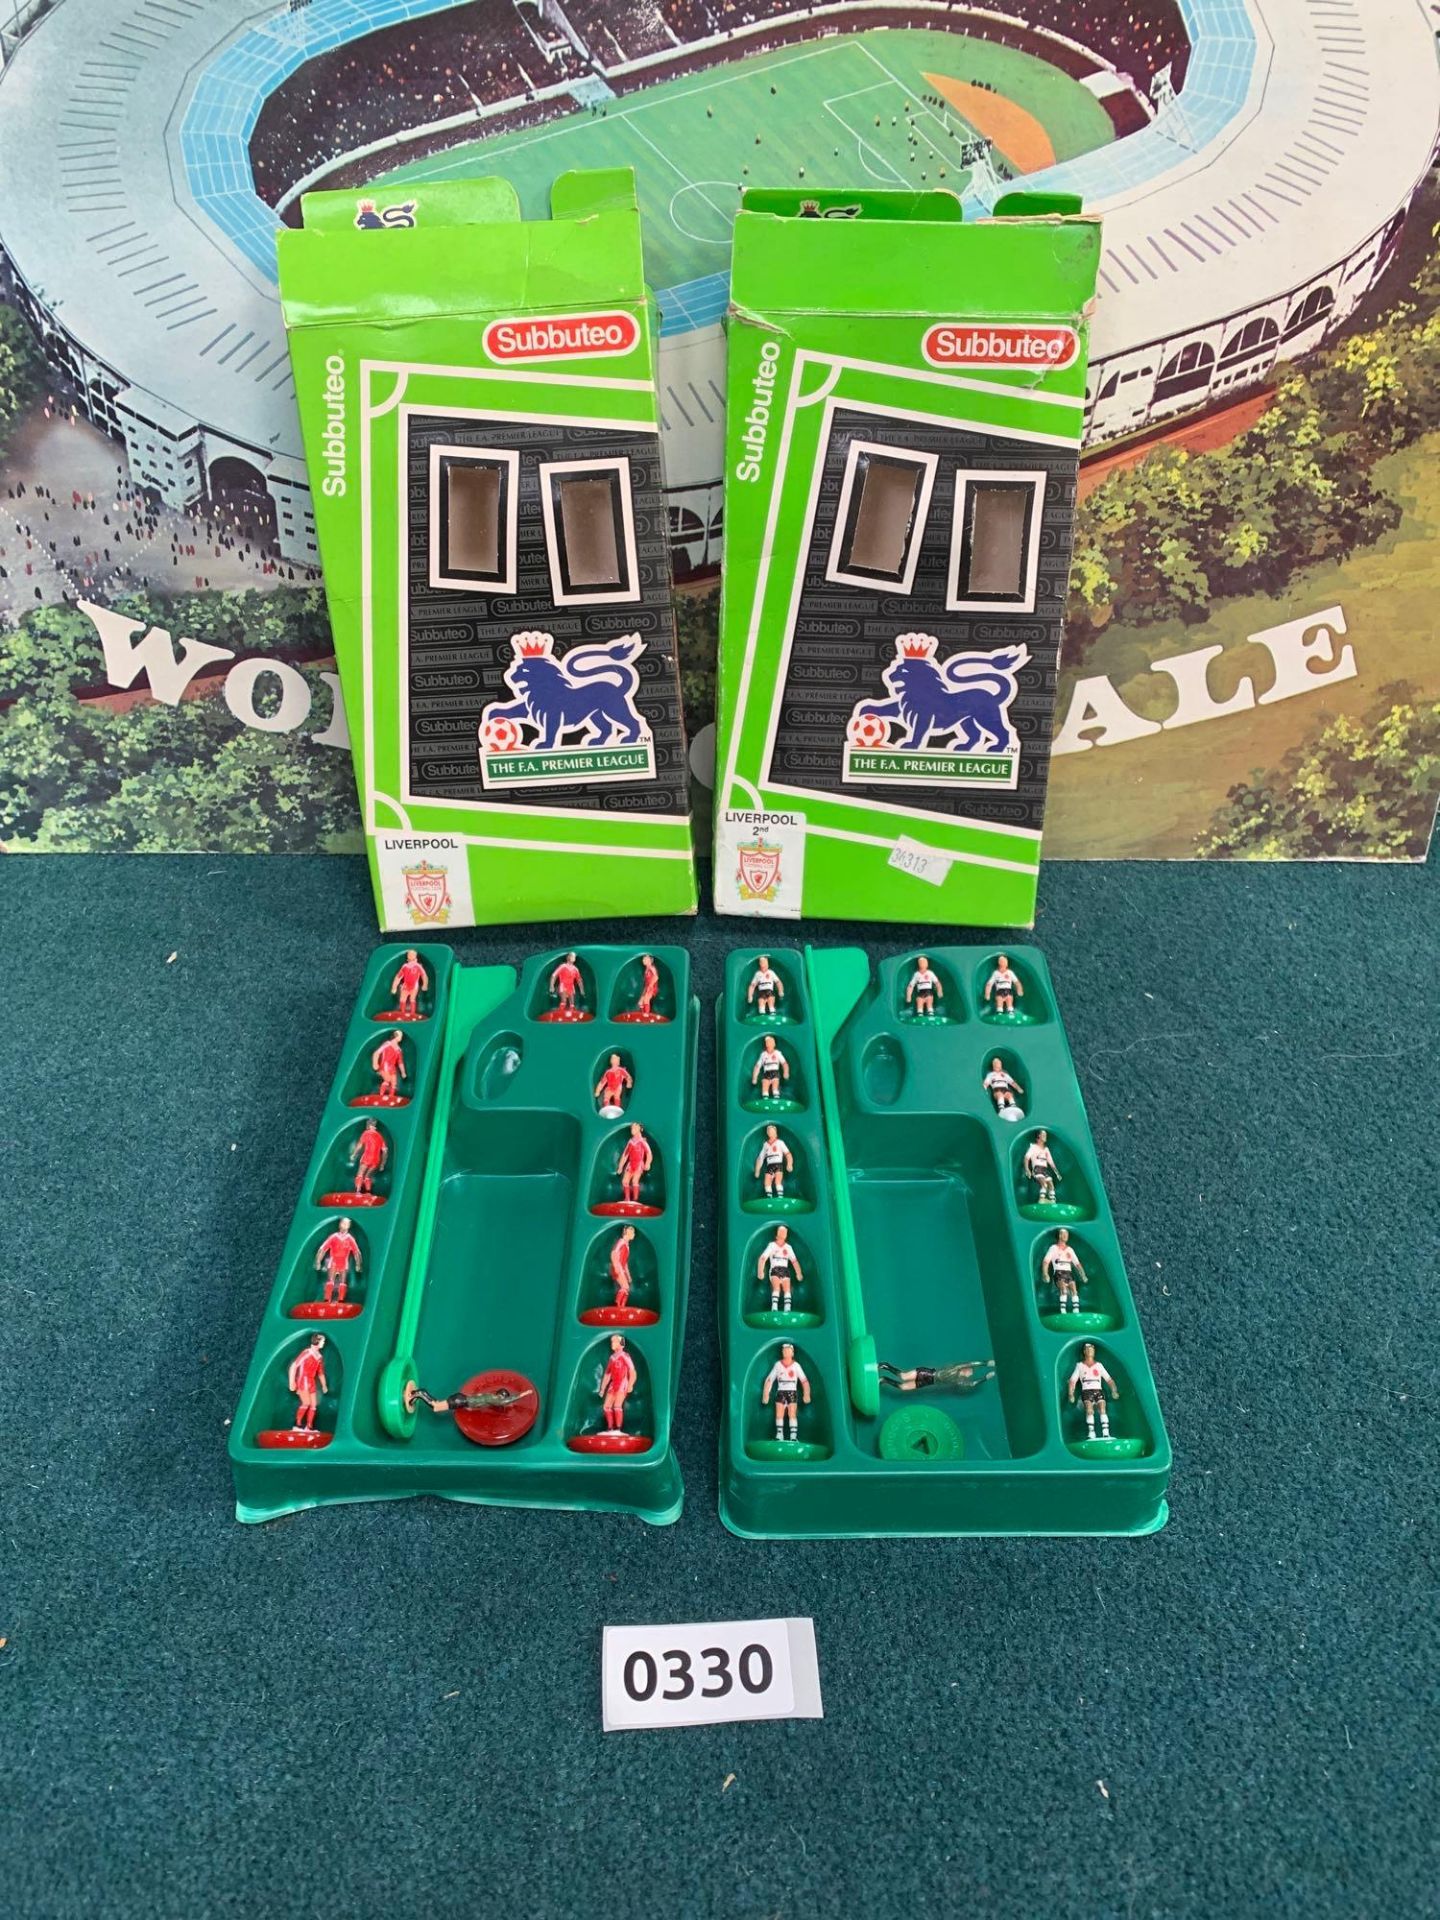 Subbuteo Liverpool Team Kits Includes Ref.63741 Premier League Team Liverpool 1996 Home Kit And - Image 2 of 4